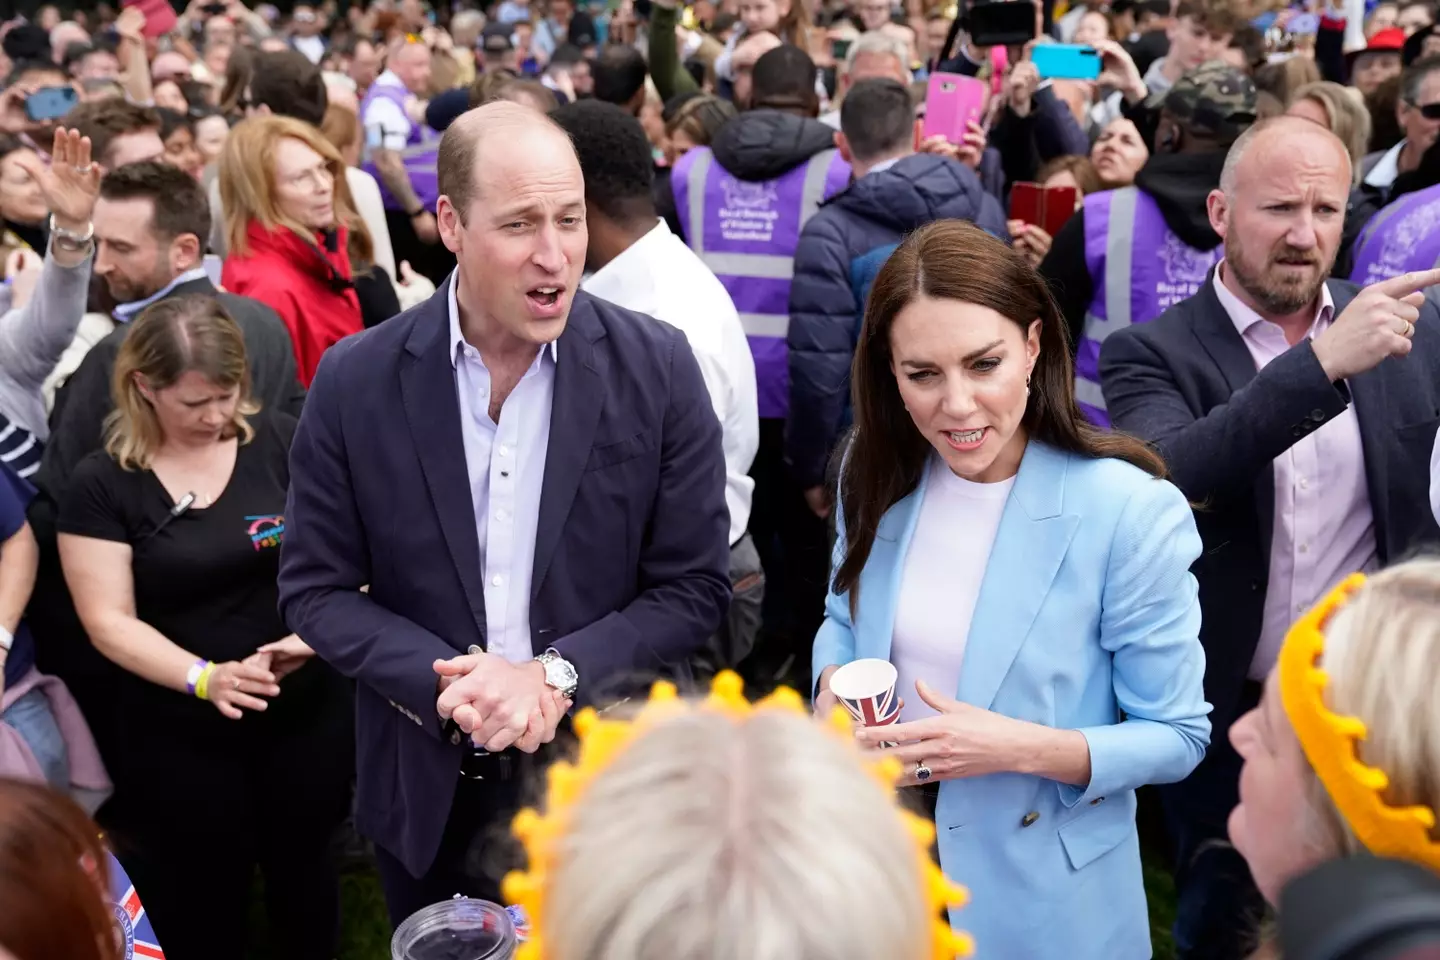 Prince William and the Princess of Wales surprised fans with a walkabout in Windsor.